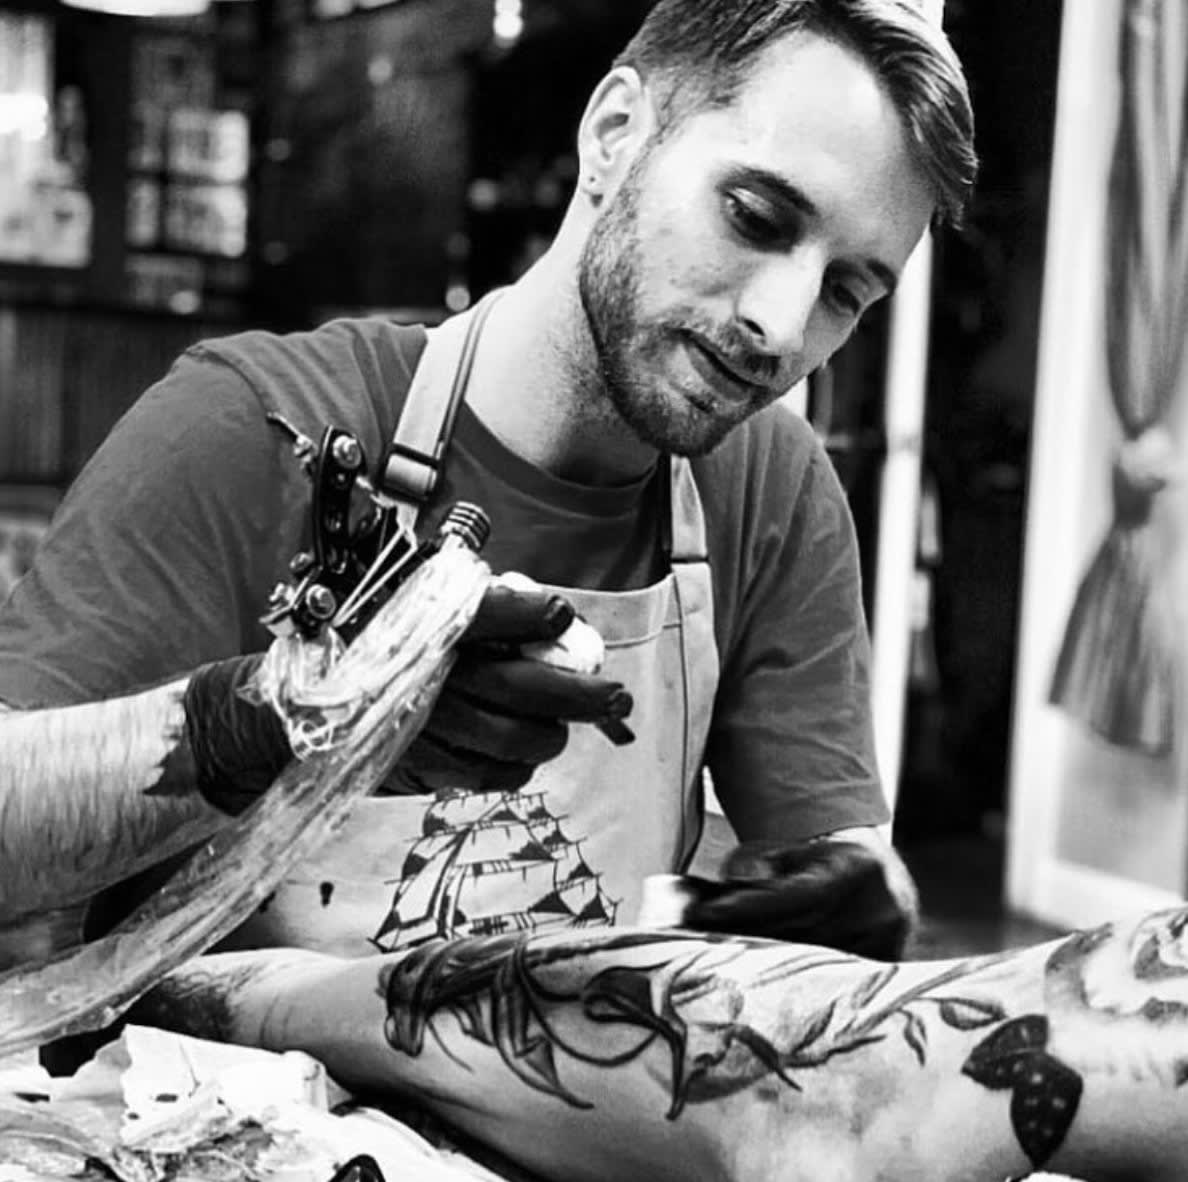 Danish Tattooz House  oin us For Tattoo Training Courses MonthlyPayment  options available  Helpdesk  9779778179 Owned By   danishahmedtattooartist Location  DanishTattoozHouse sco 6 ground  floor sector 10 panchkula opp